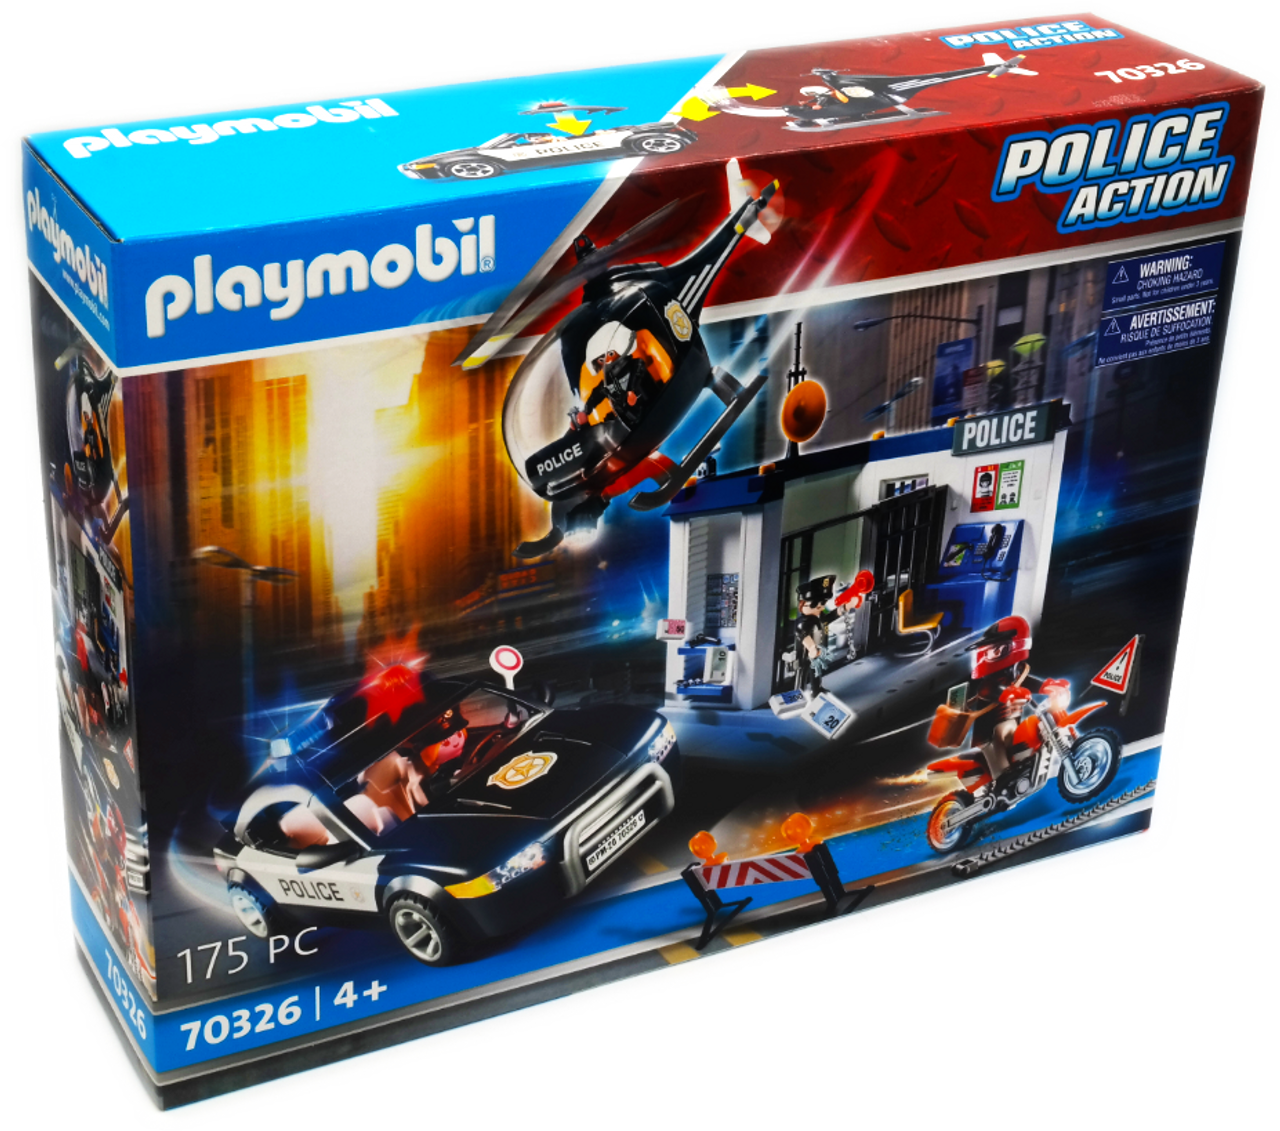 Playmobil City Action Police Carrier with light and sound